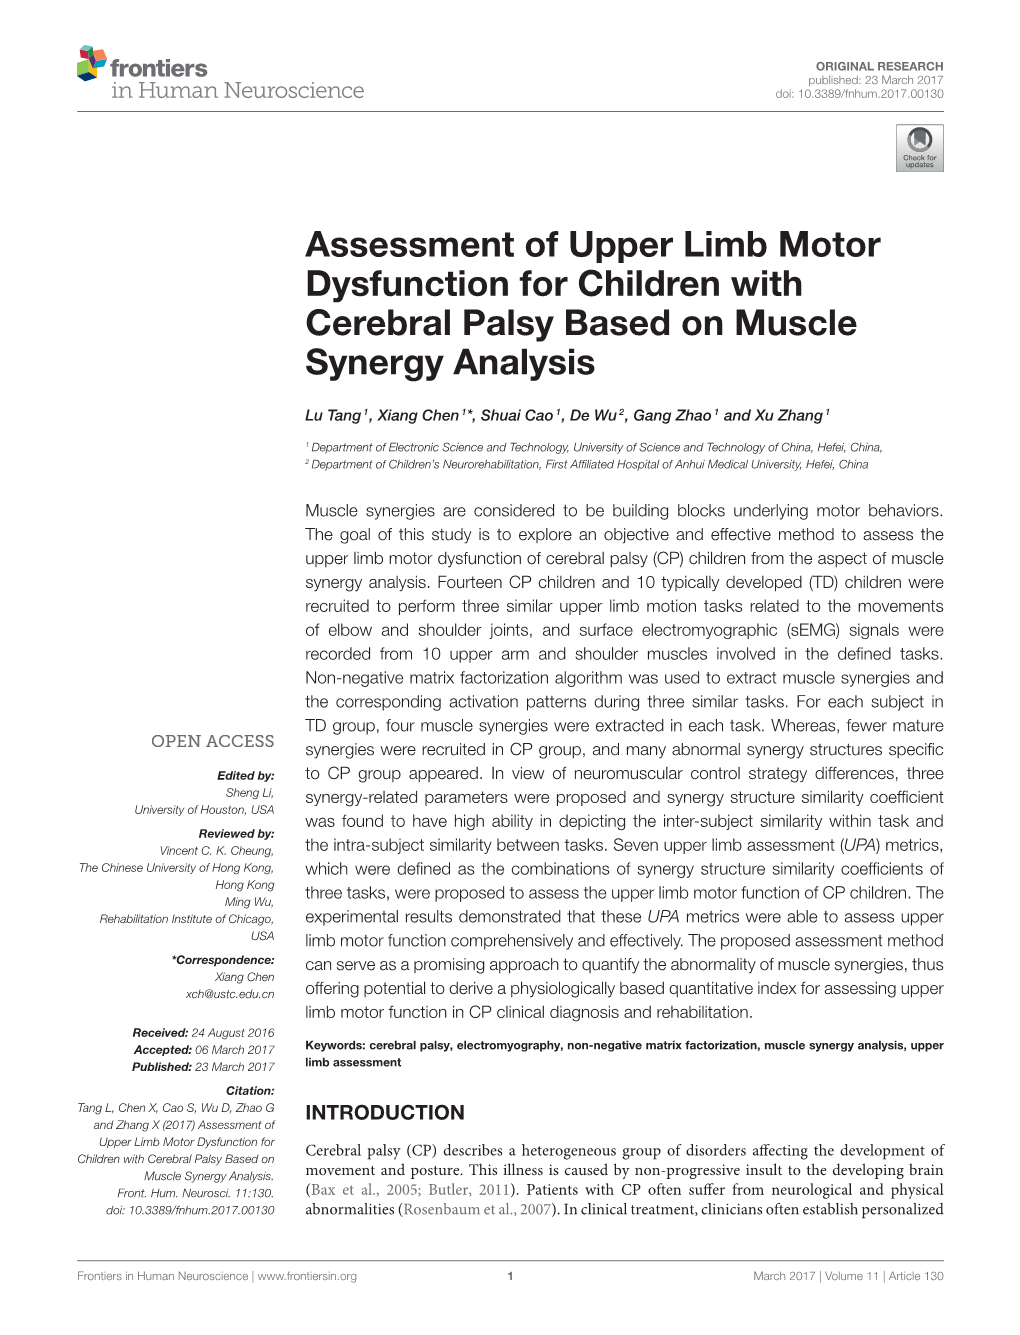 Assessment of Upper Limb Motor Dysfunction for Children with Cerebral Palsy Based on Muscle Synergy Analysis